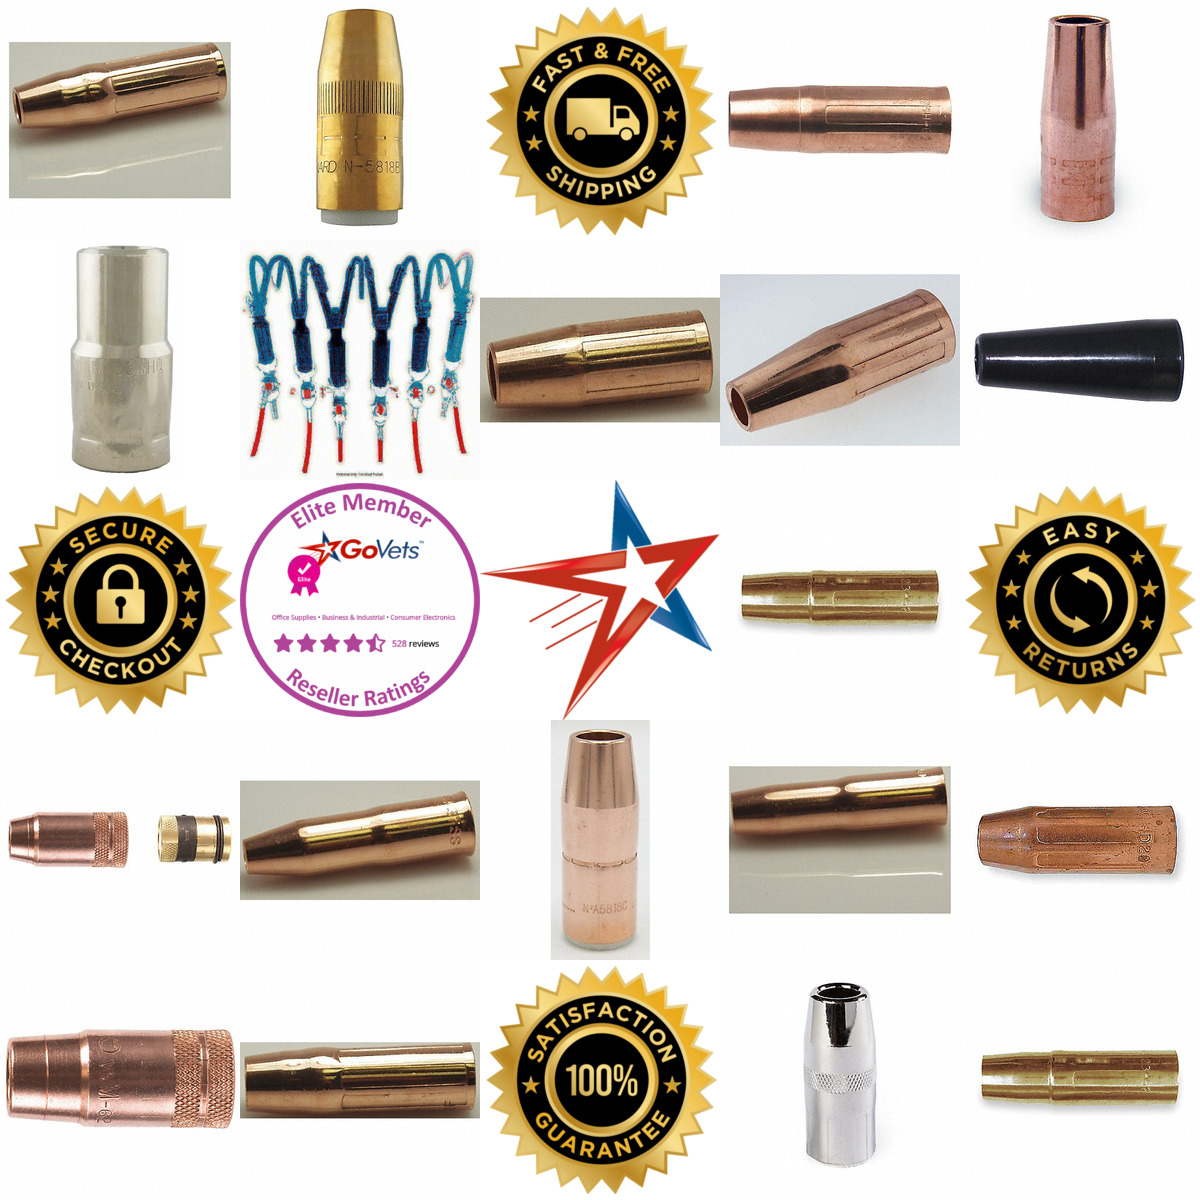 A selection of Mig Nozzles products on GoVets